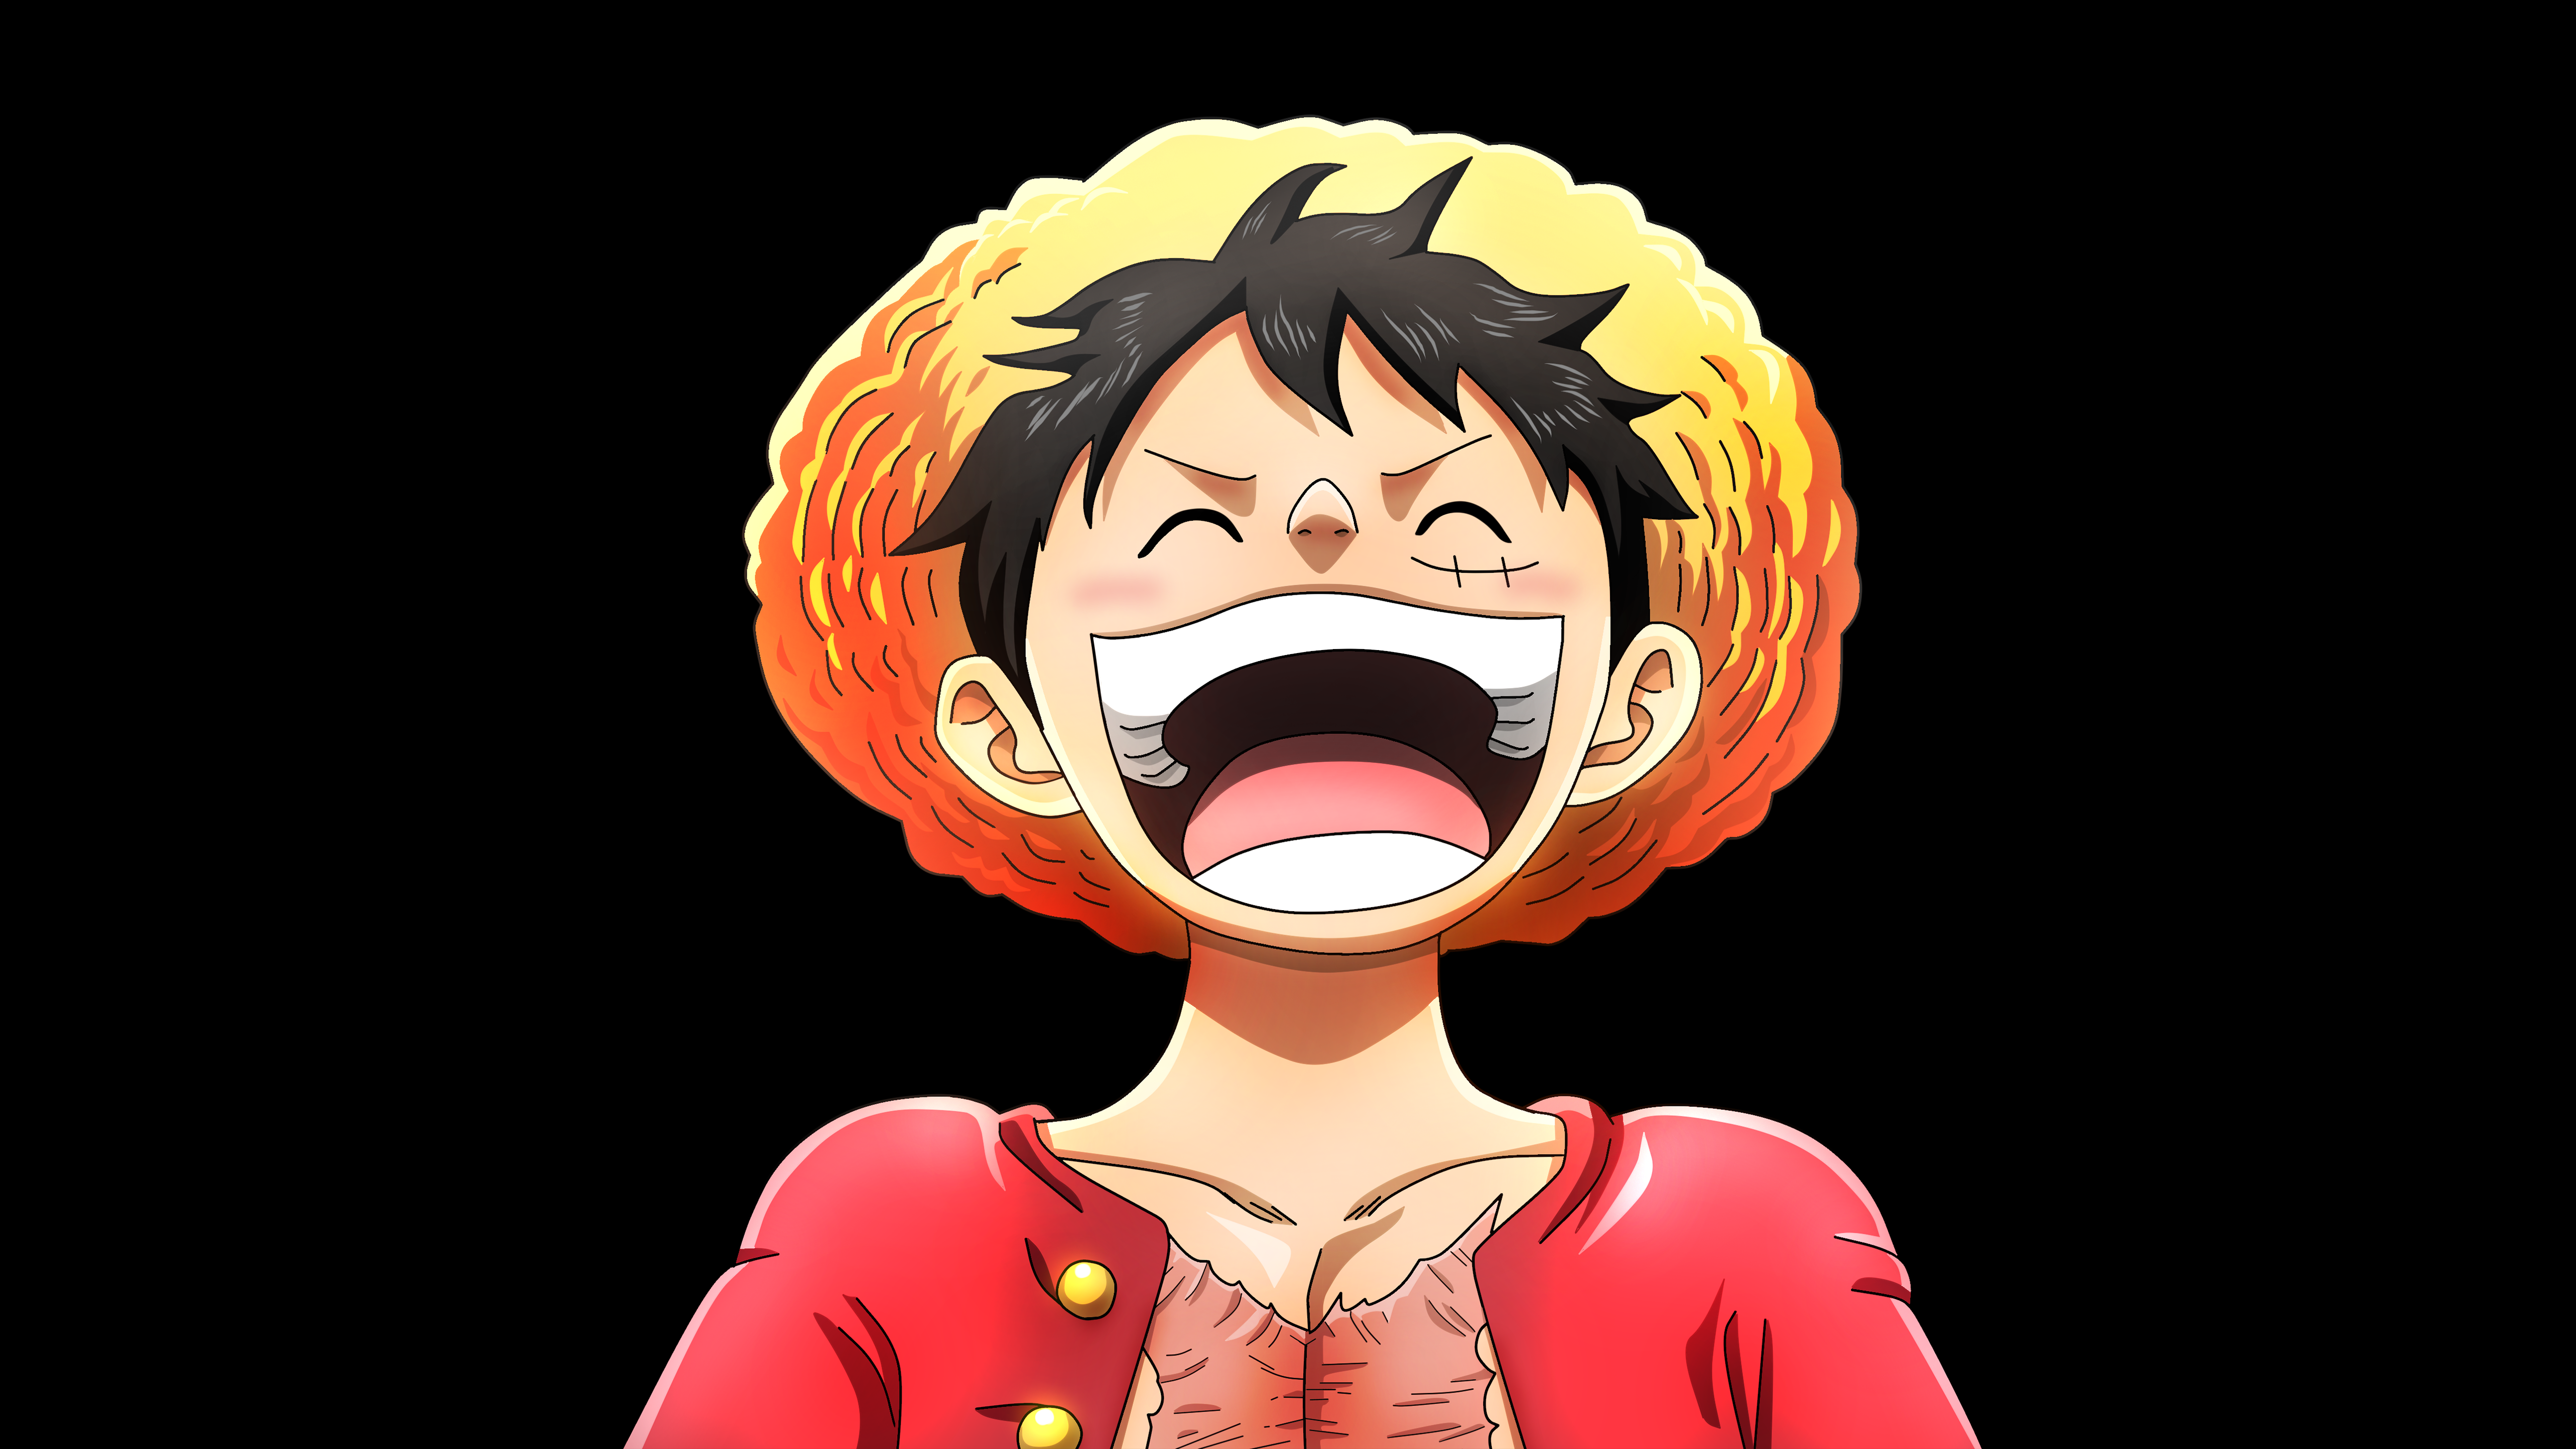 1500+ Monkey D. Luffy HD Wallpapers and Backgrounds